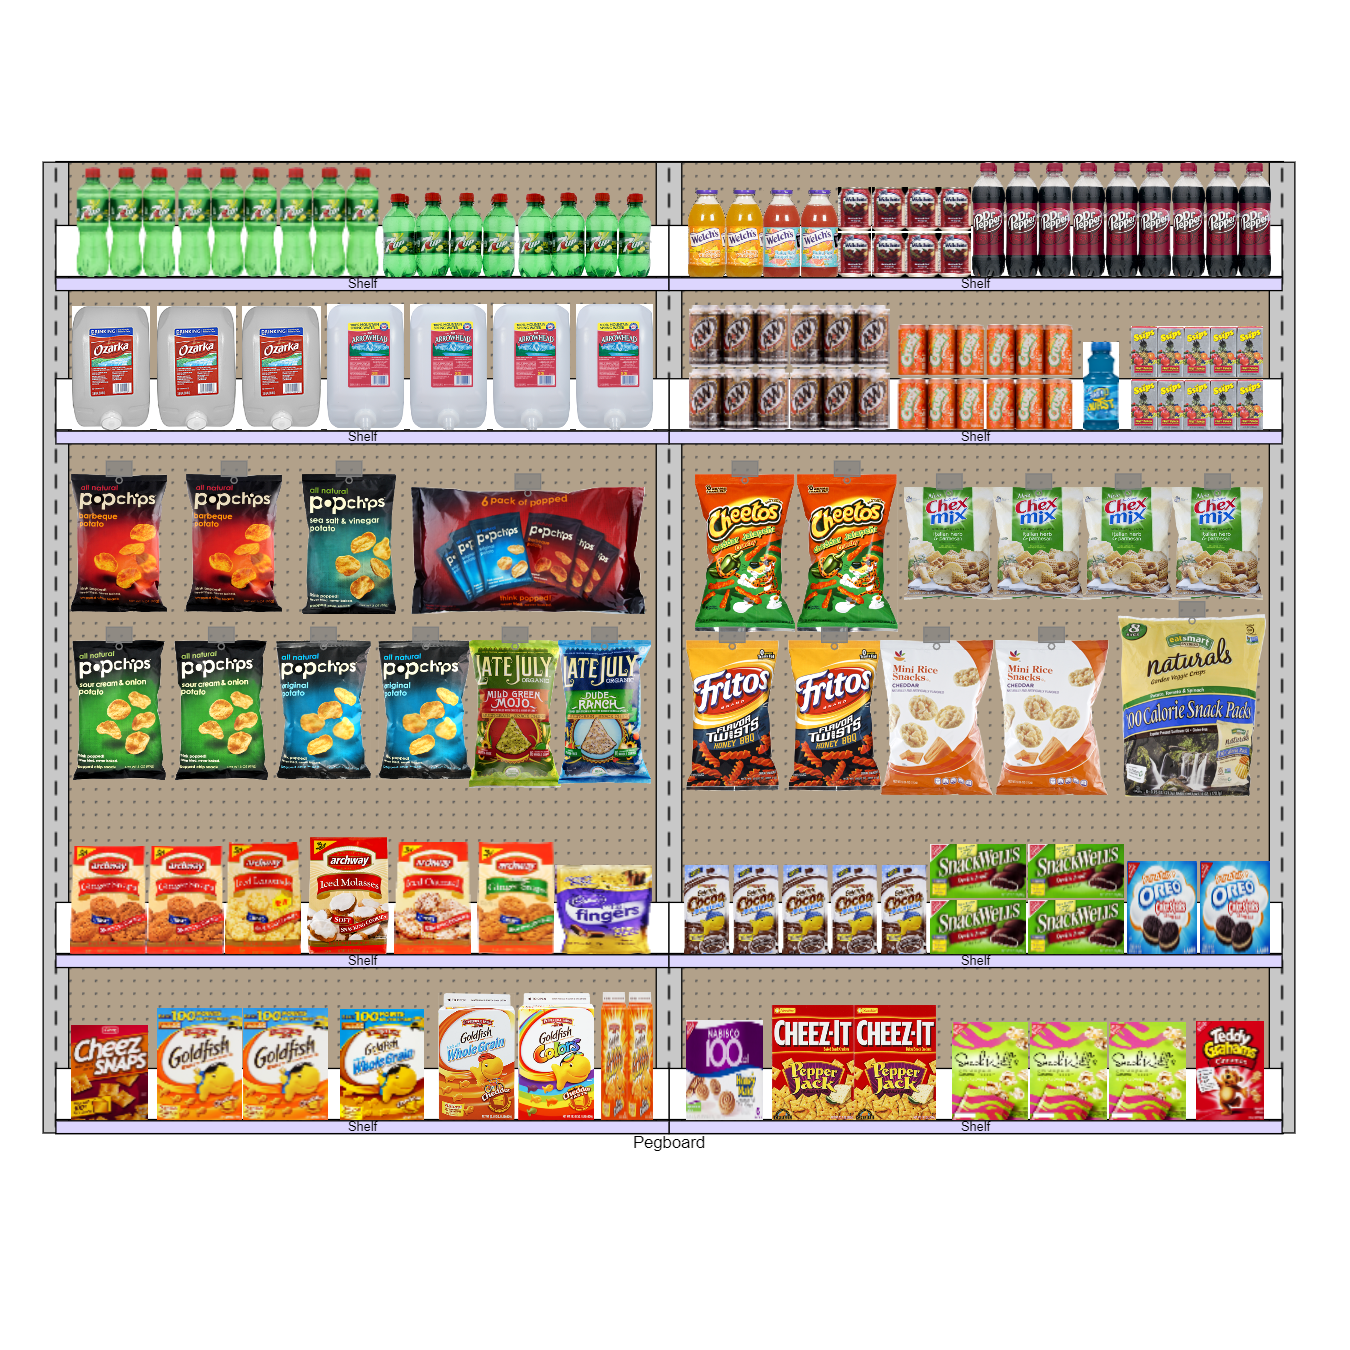 Grocery planogram display, shelves and pegboard